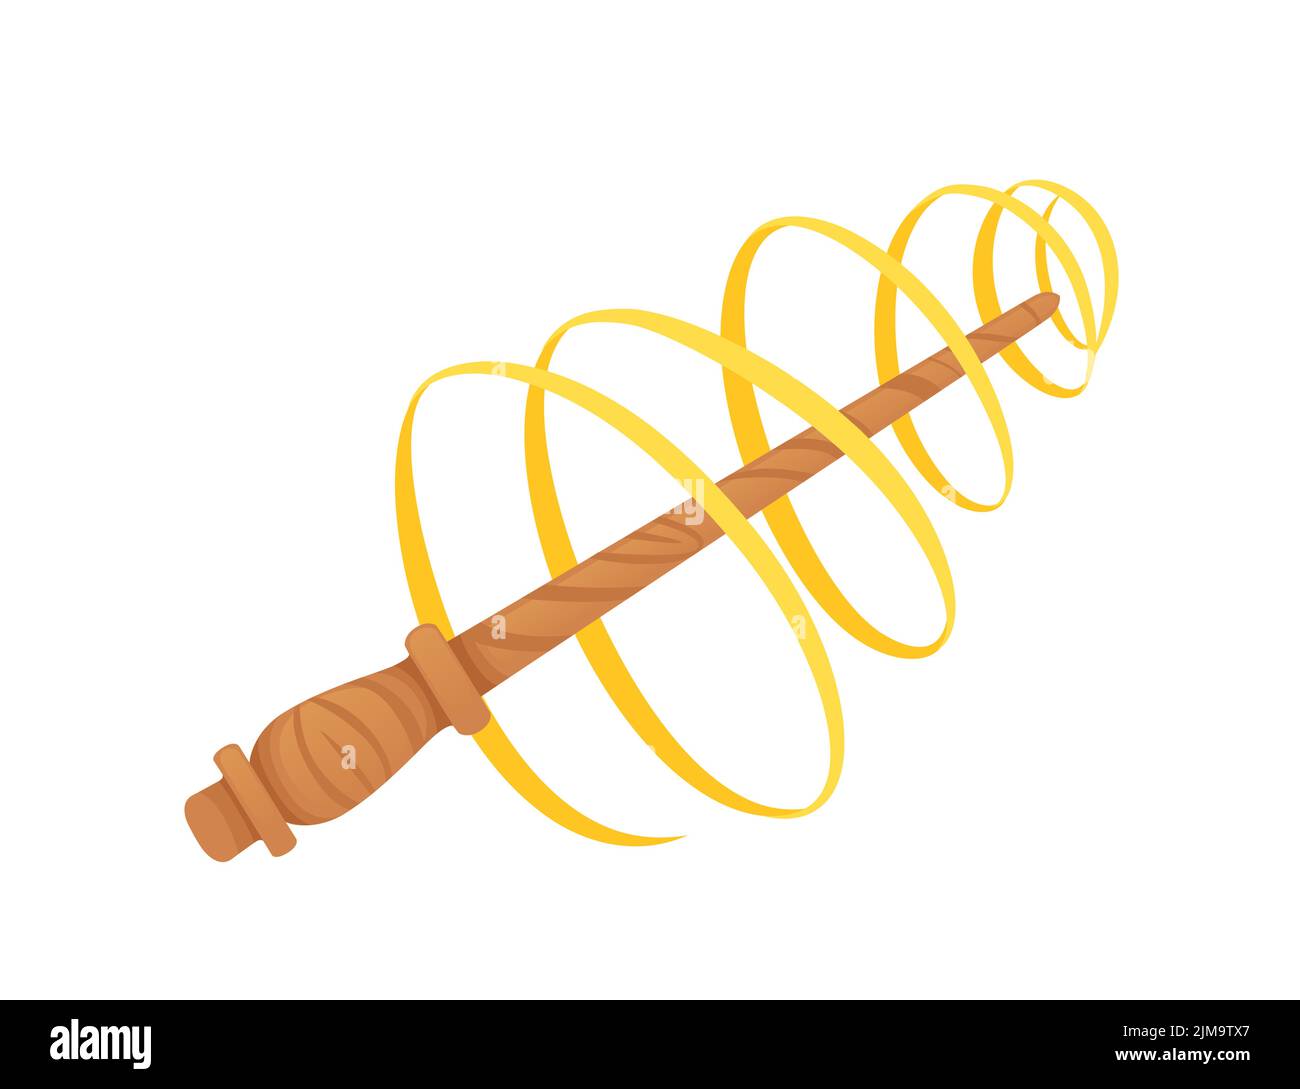 Wooden magic wand with magic wand swirl effect vector illustration isolated on white background Stock Vector